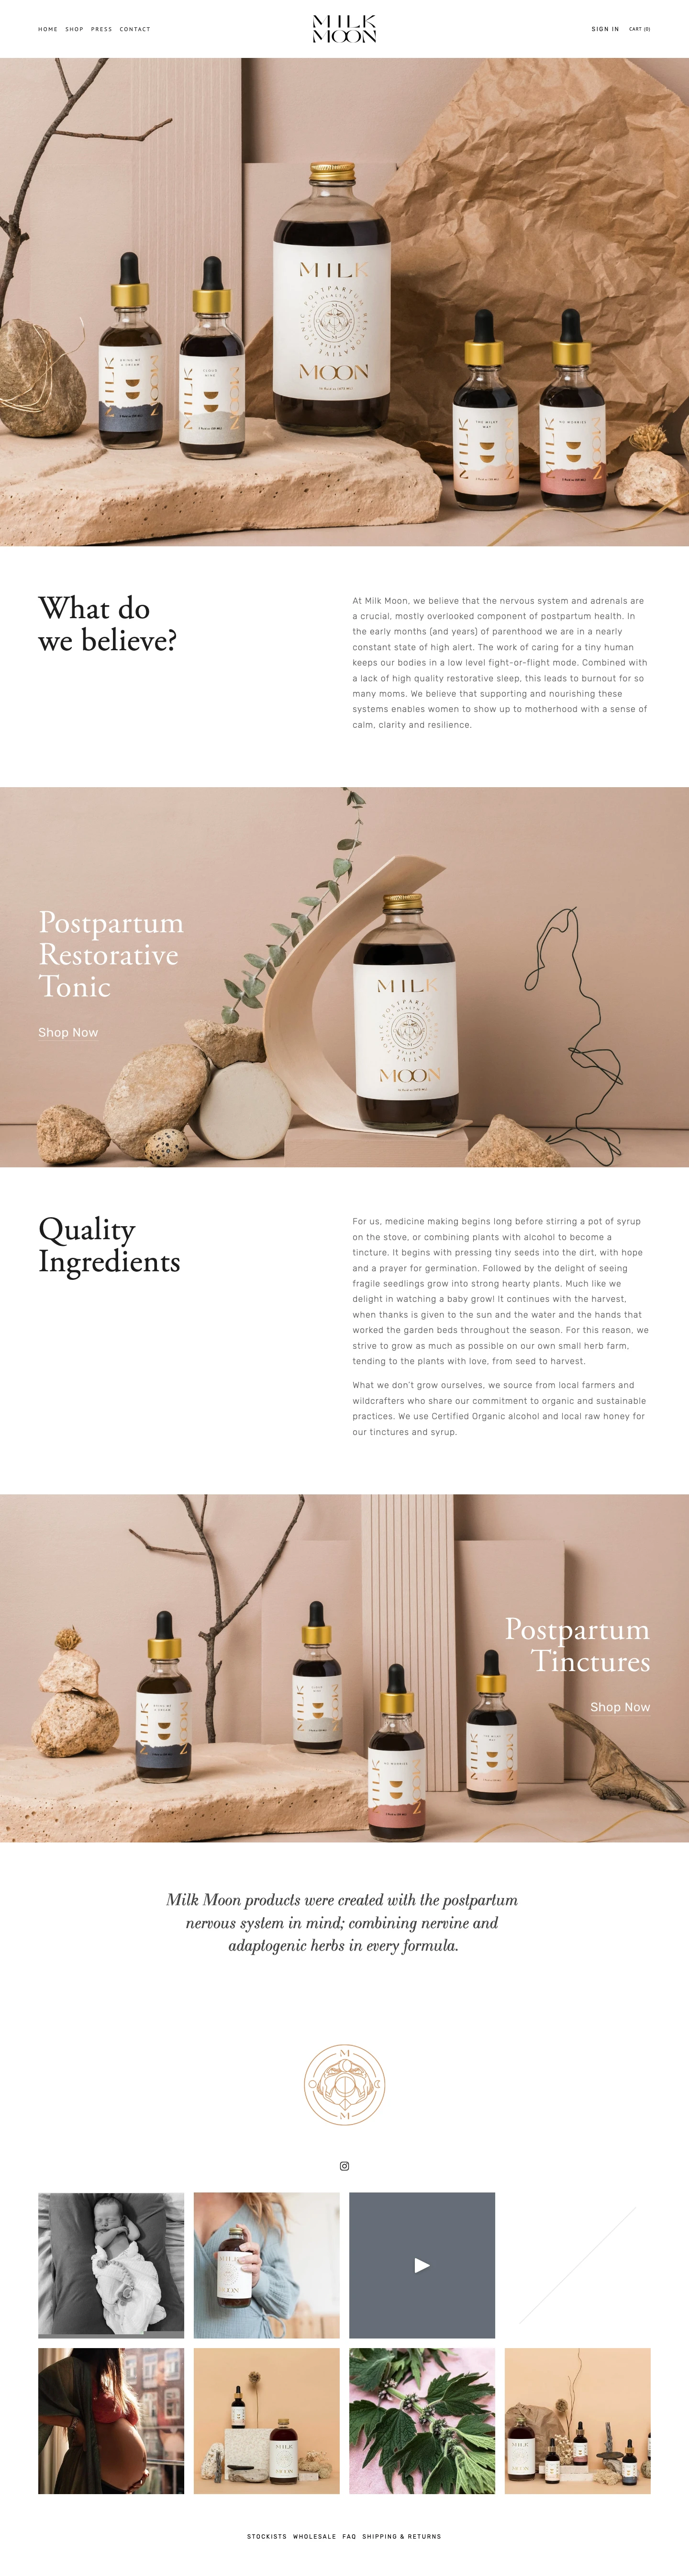 Milk Moon Landing Page Example: Herbs for postpartum wellness. Milk Moon products were created with the postpartum nervous system in mind; combining nervine and adaptogenic herbs in every formula.